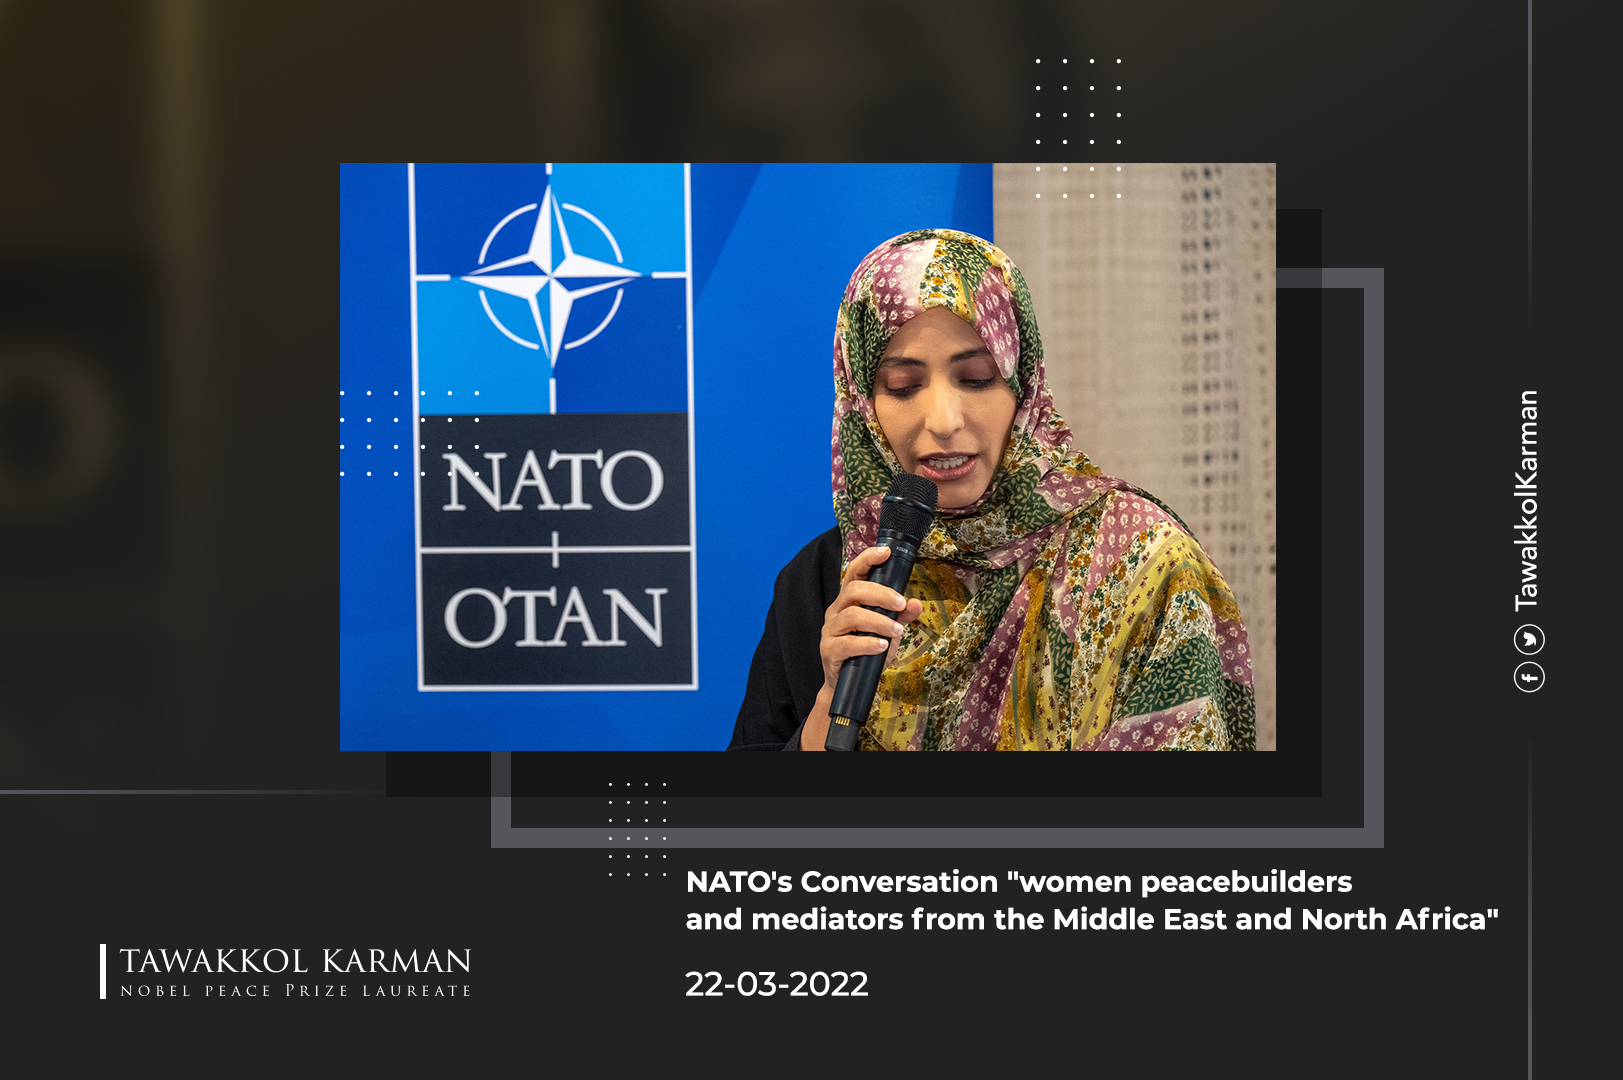 Tawakkol Karman's Participation in NATO's Conversation "women peacebuilders and mediators from the Middle East and North Africa"